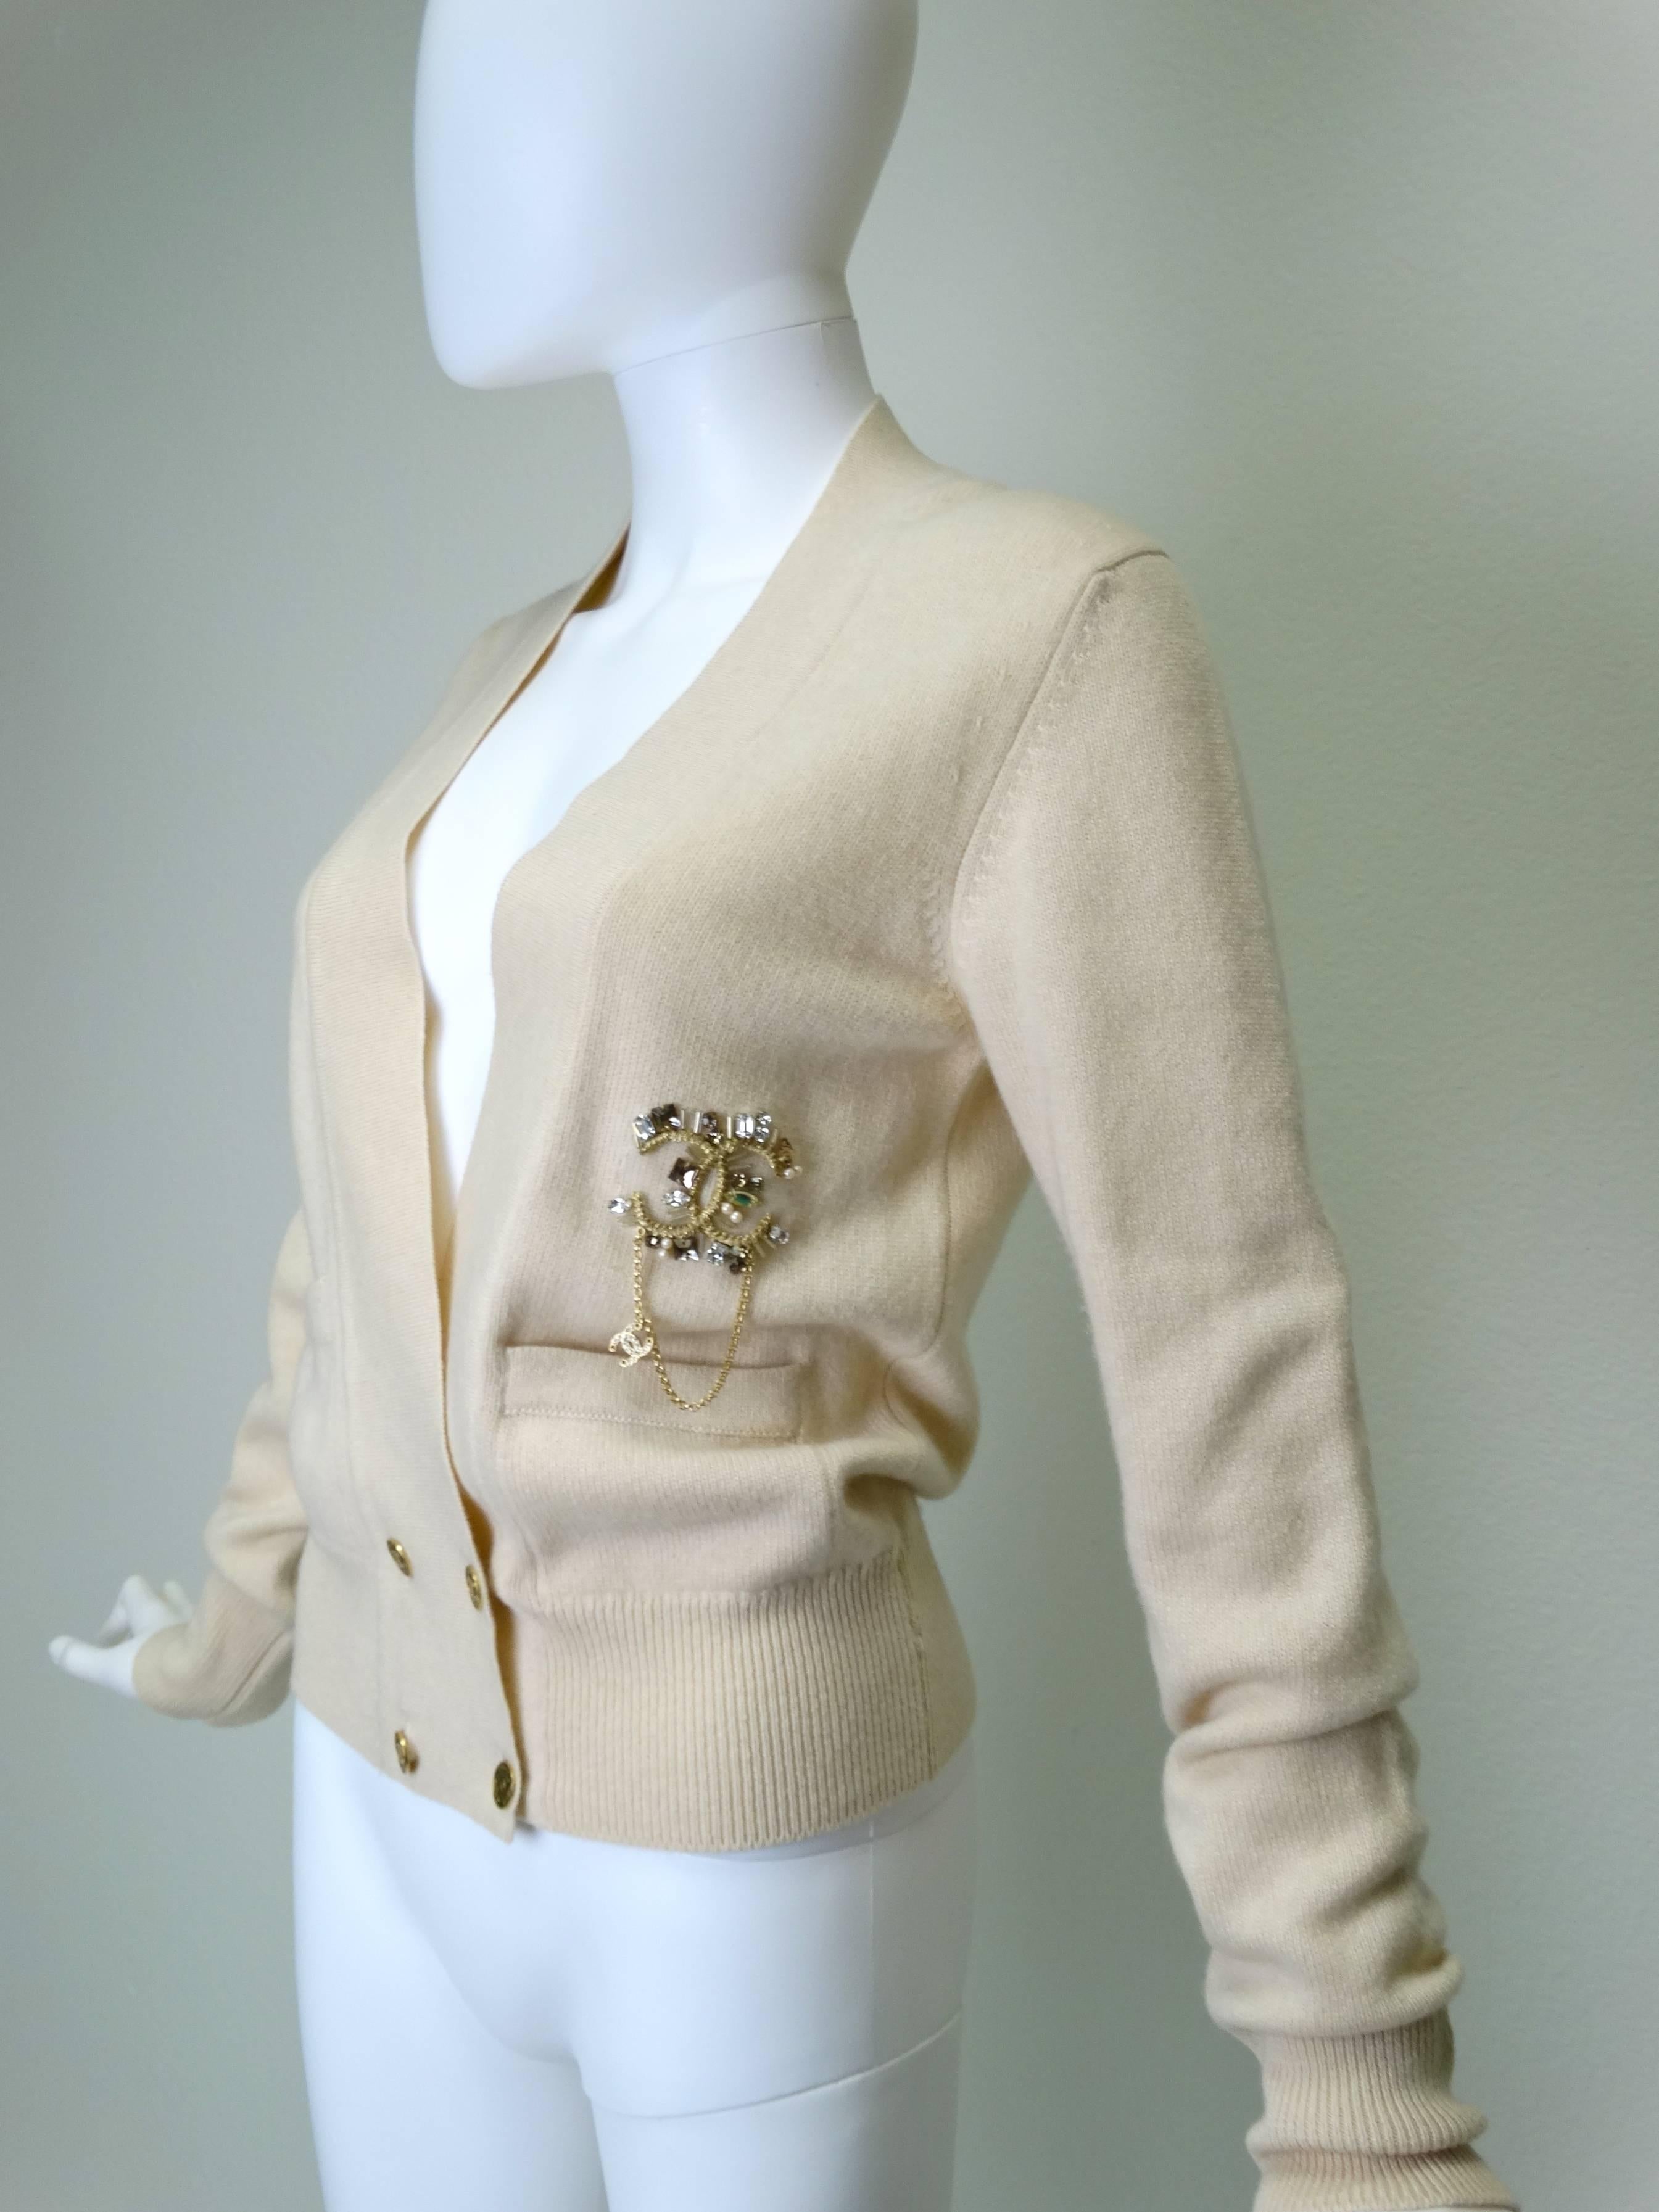 A Chanel 2006A 100% cashmere deep v-neck sweater with double breasted buttons. Sweater is crème with a beautiful encrusted crystal CC logo on the left side. CC emblem has faux crystals, pearls and rhinestones with a gold chain hanging down which